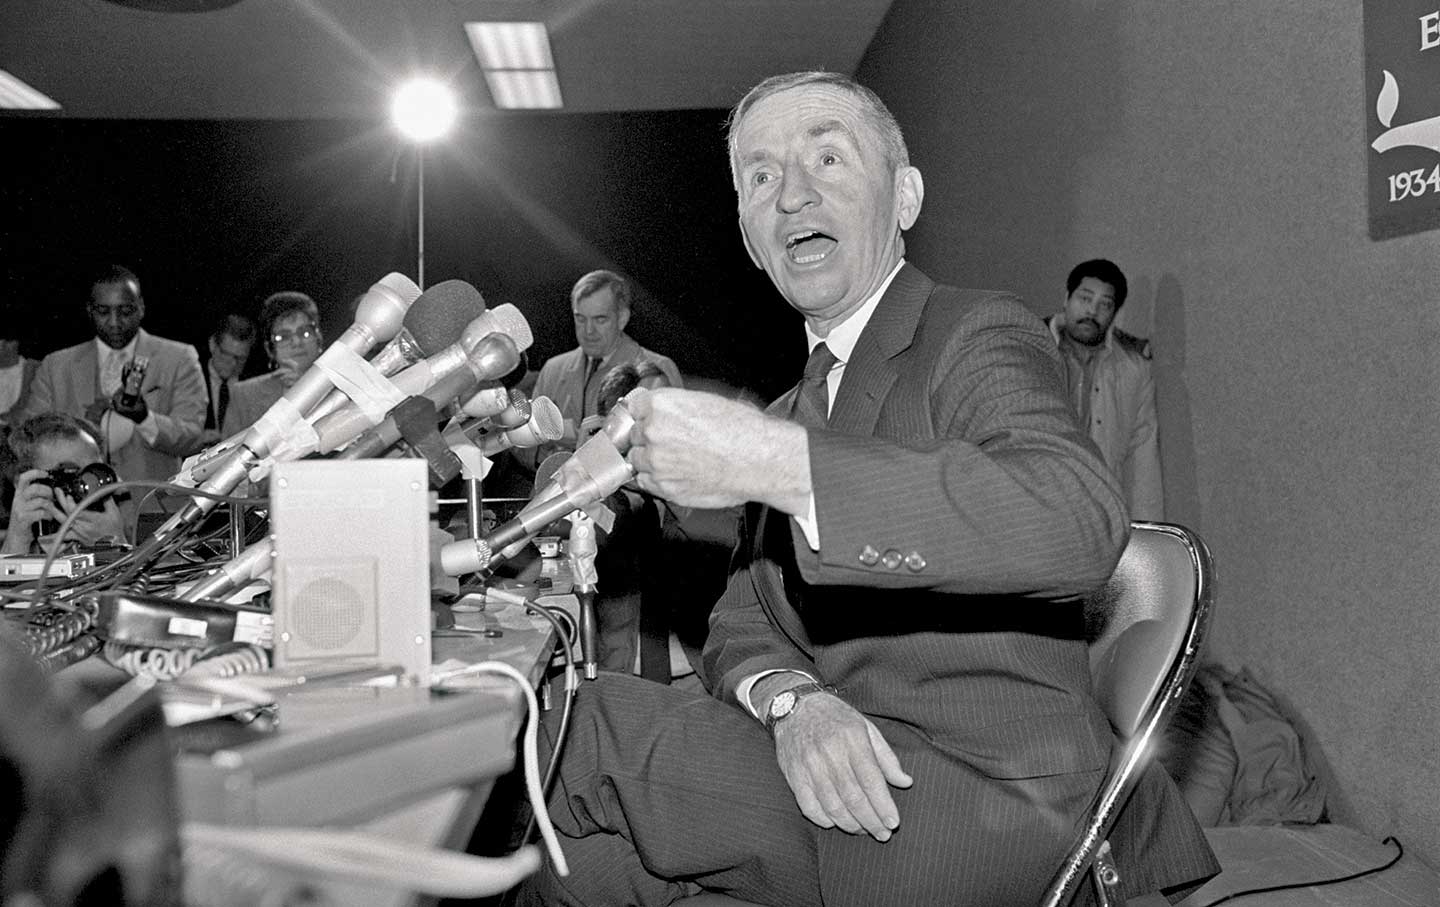 Ross Perot prior to an address to the Economic Club of Detroit.